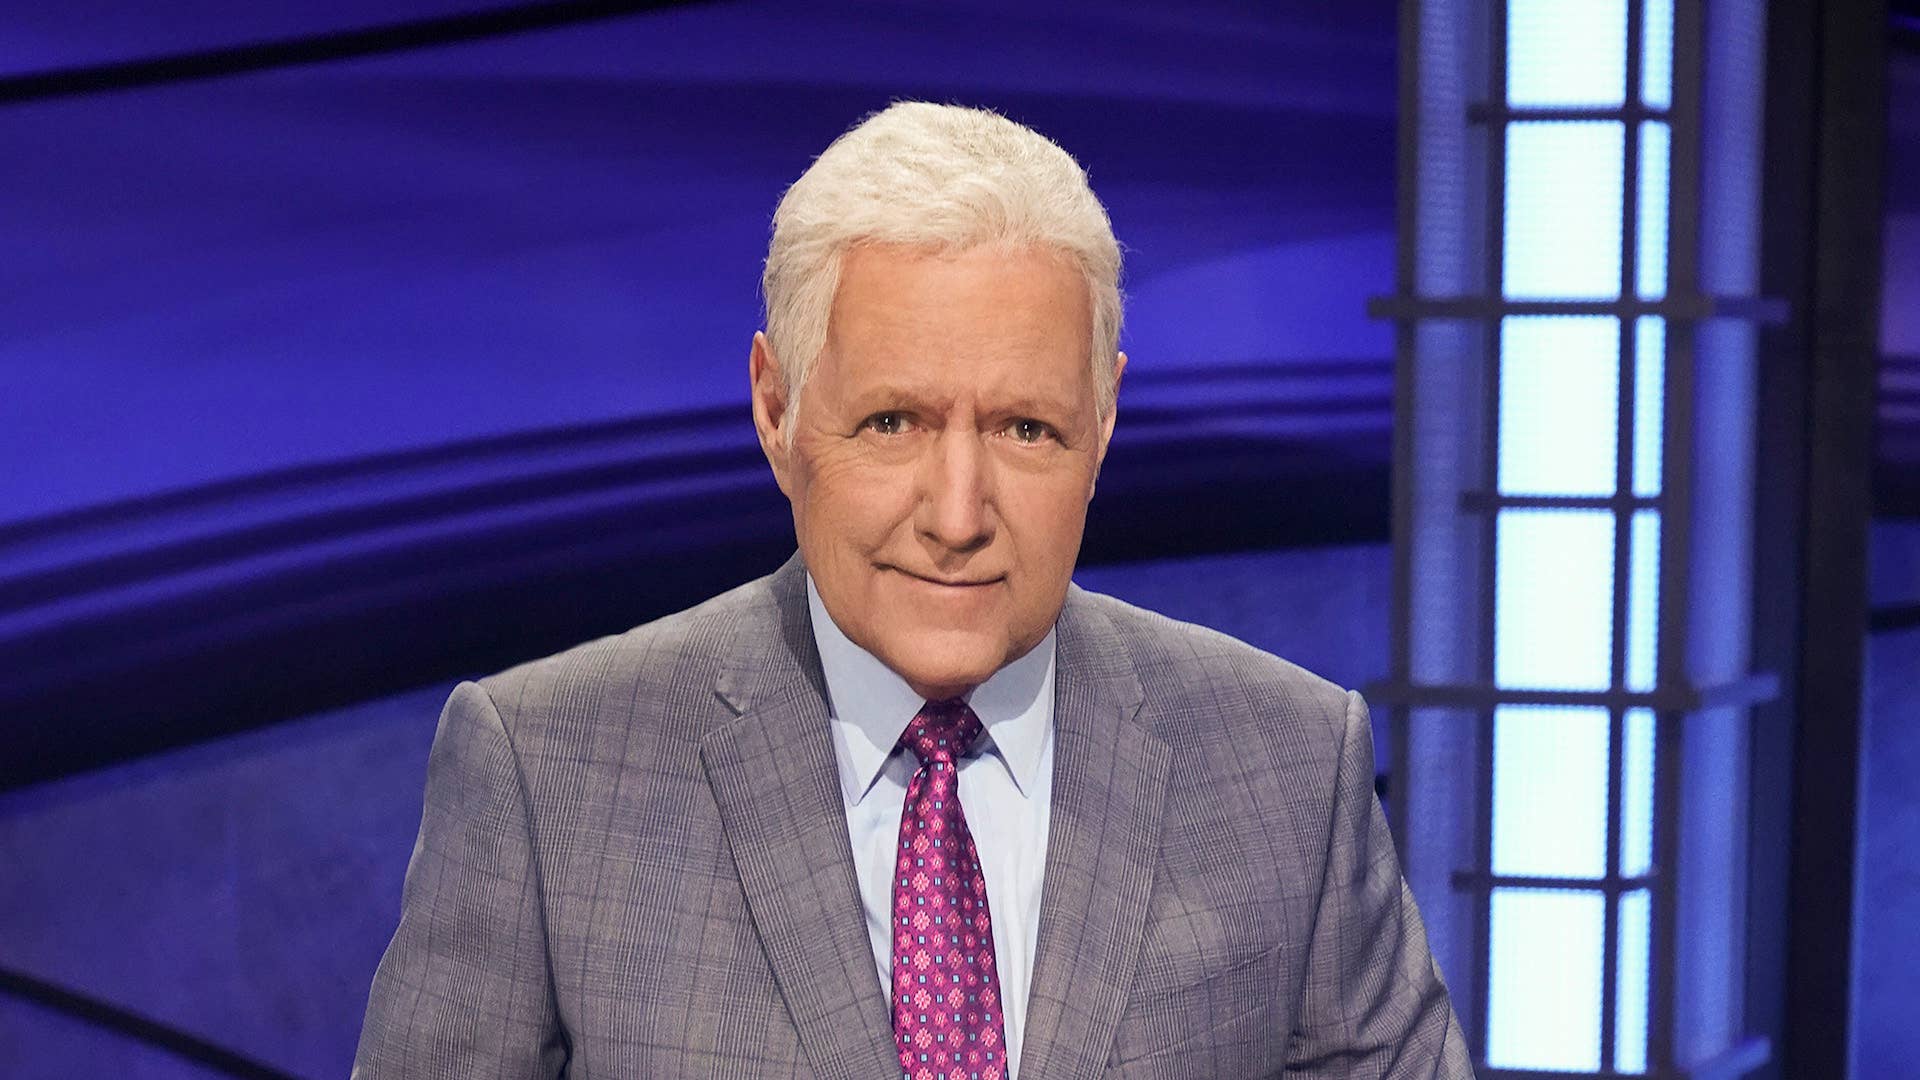 Alex Trebek, "JEOPARDY! The Greatest of All Time" is produced by Sony Pictures Television